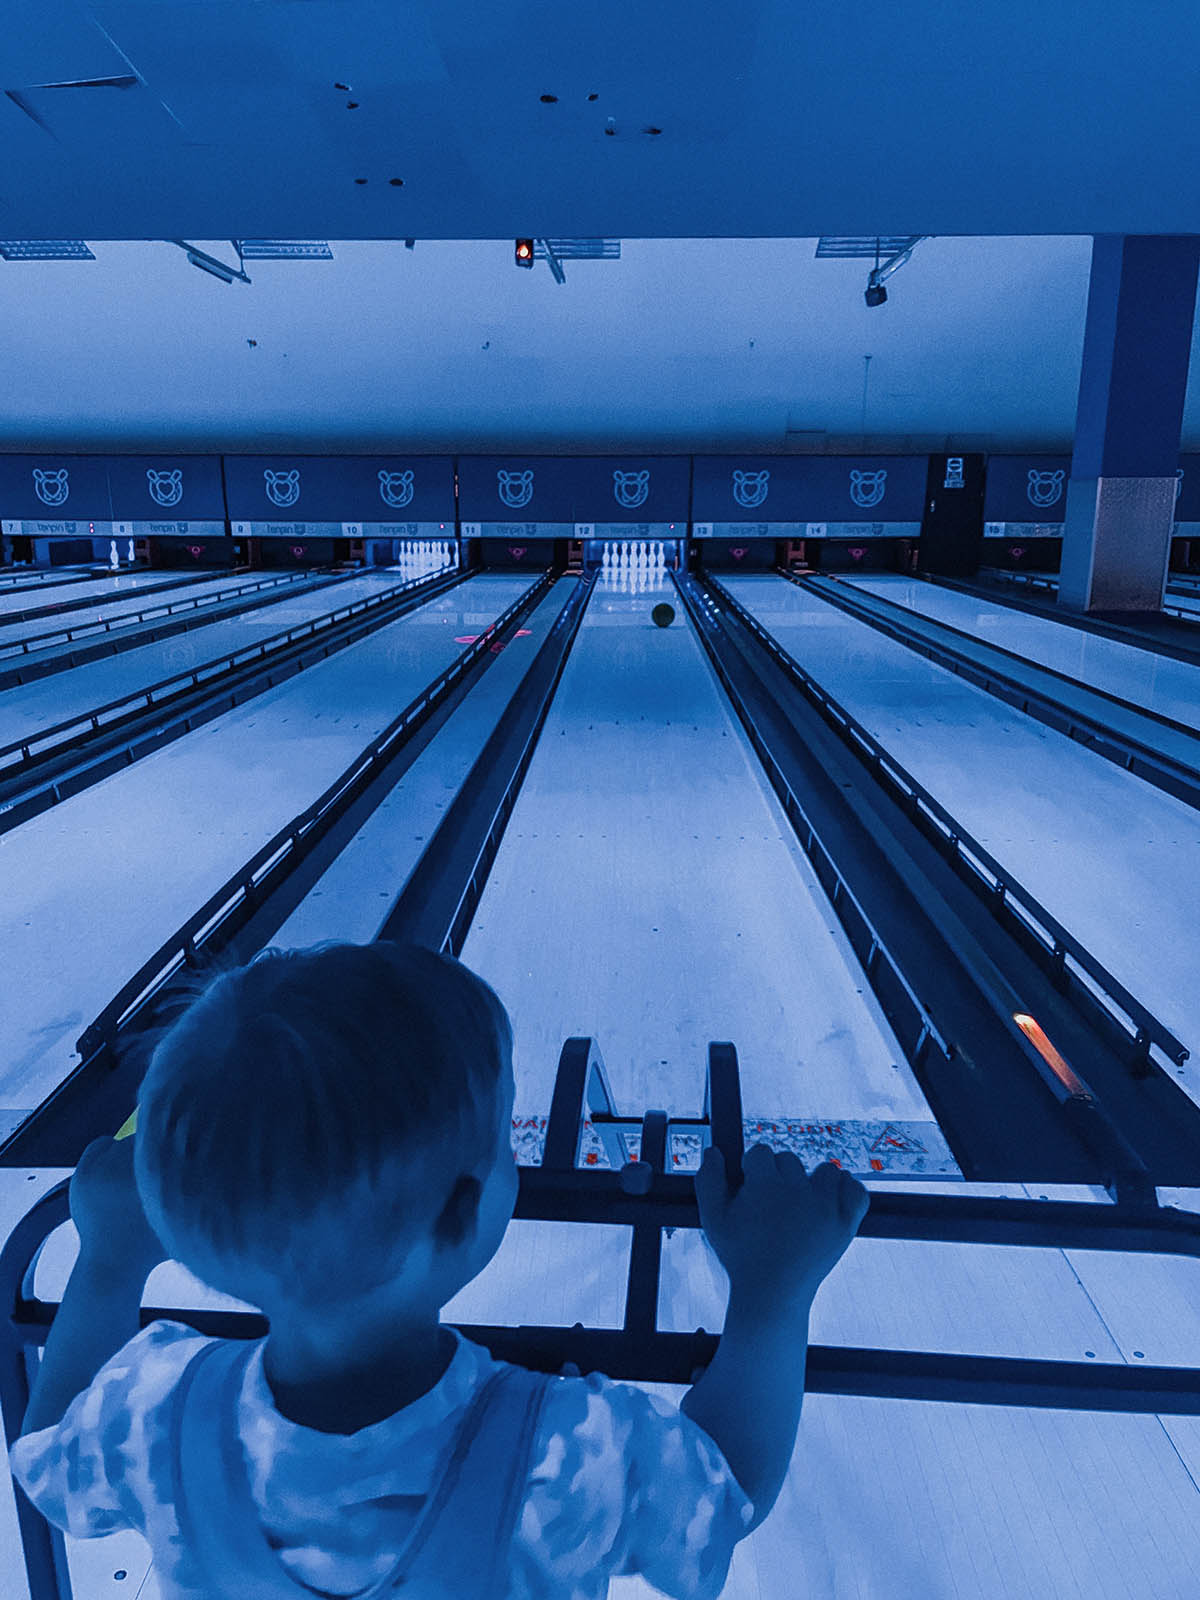 tenpin york review family evening family fun date night social arcades bowling alley yorkshire